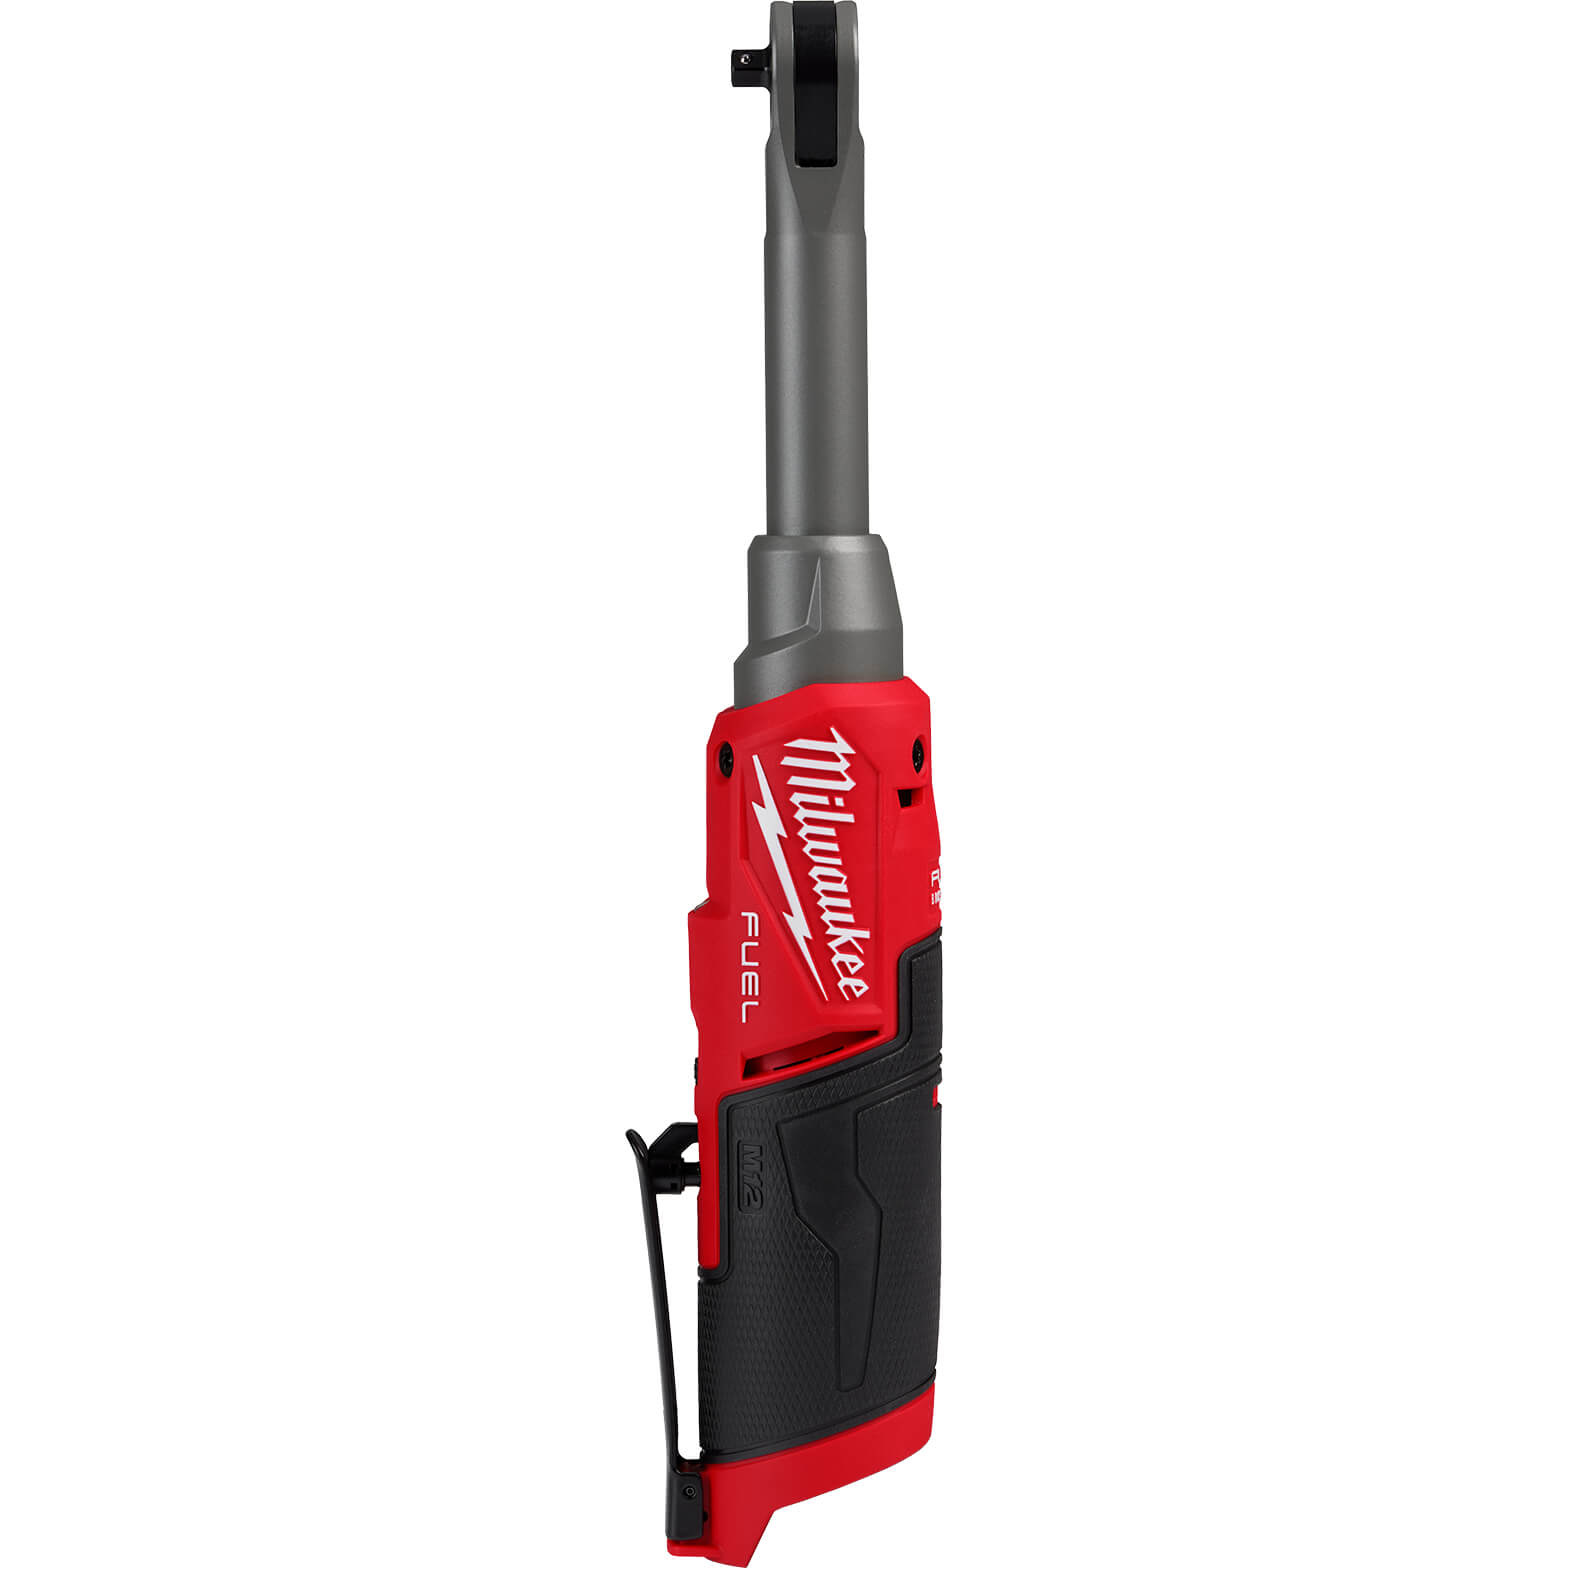 Photos - Wrench Milwaukee M12 FHIR14LR Fuel 12v Cordless Brushless 1/4" Drive Long Ratchet 